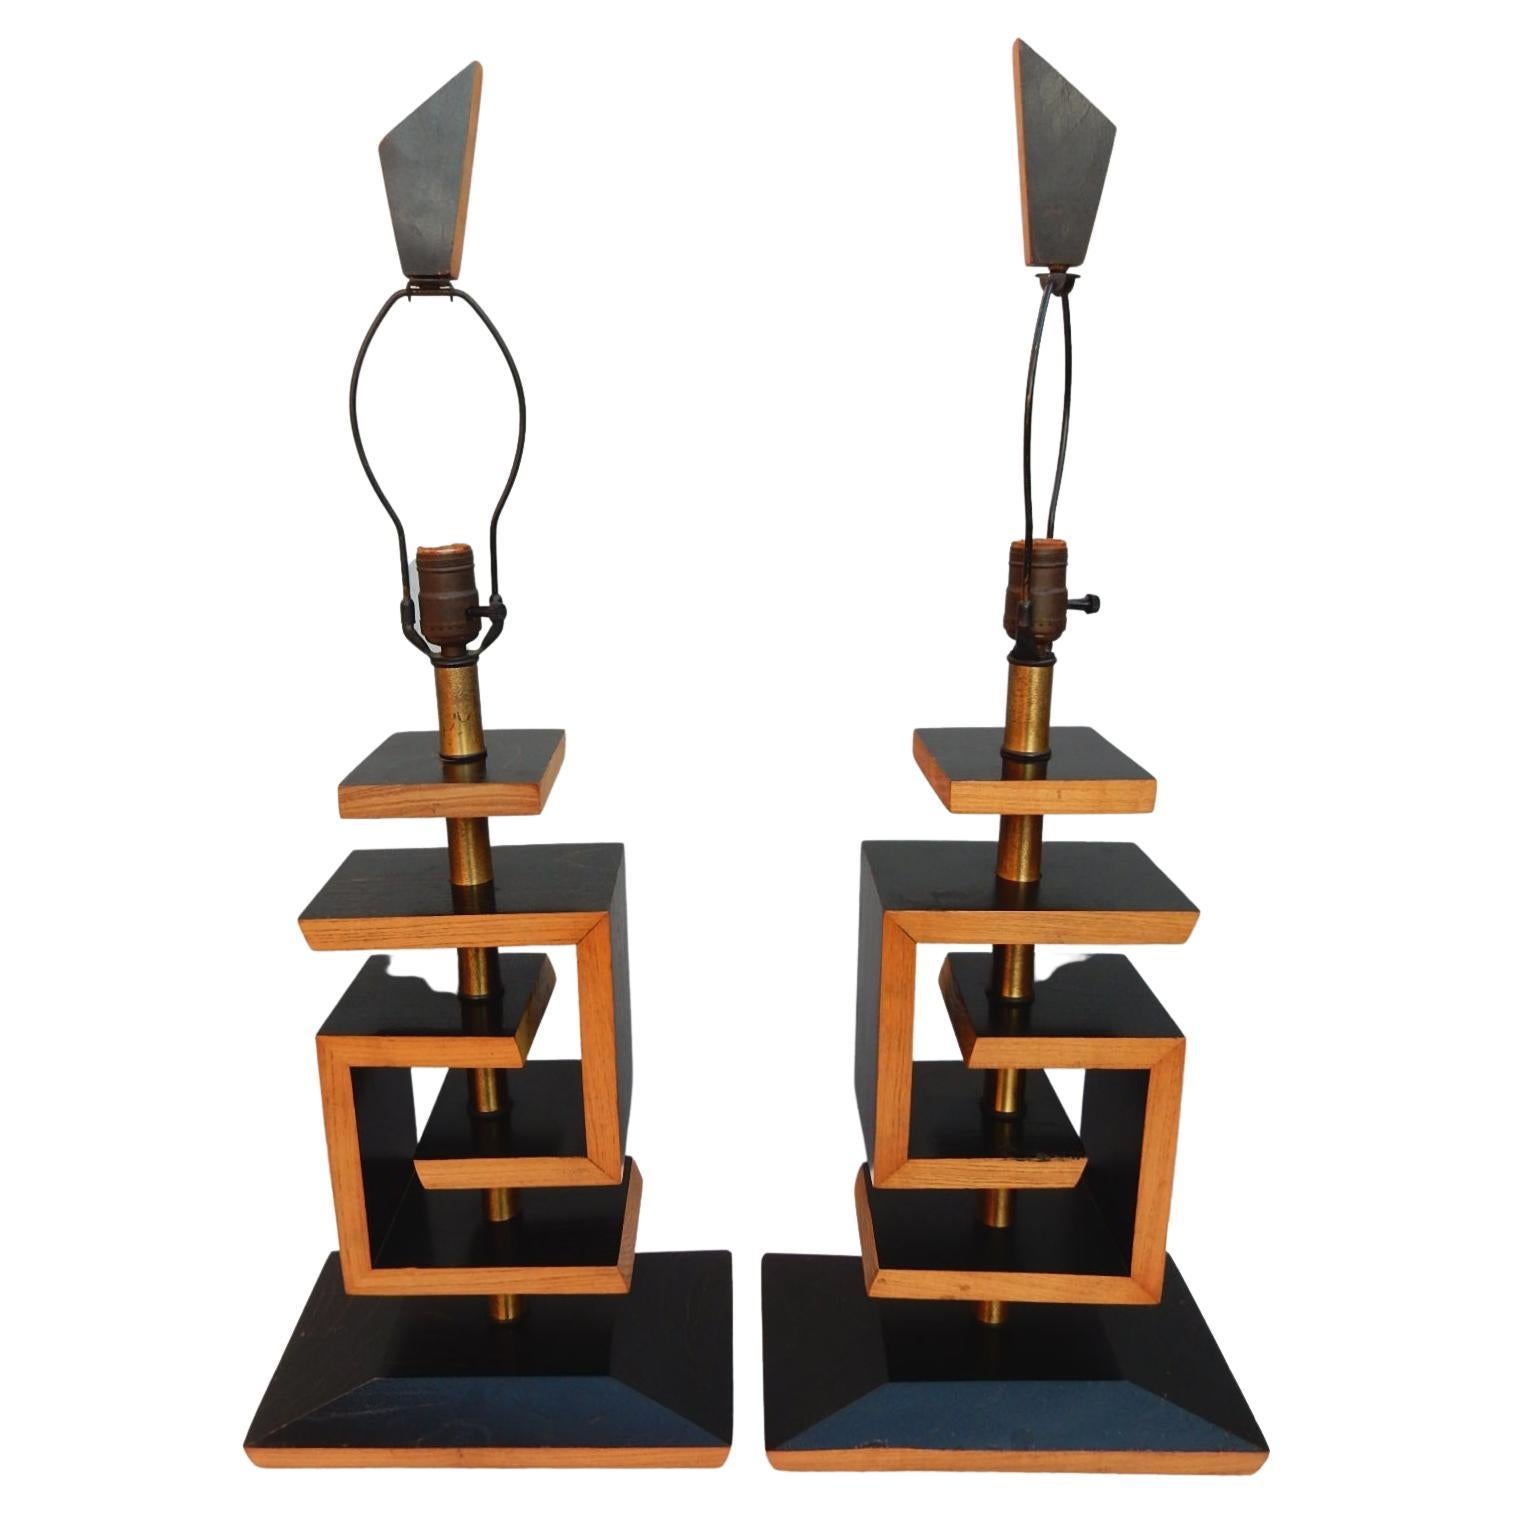 A dramatic pair of sculpted geometric cerused oak table lamps designed in the style of James Mont, circa late 1940s.
Two-tone ebony and natural color. 
Included are the original two tone cloth shades and finials.